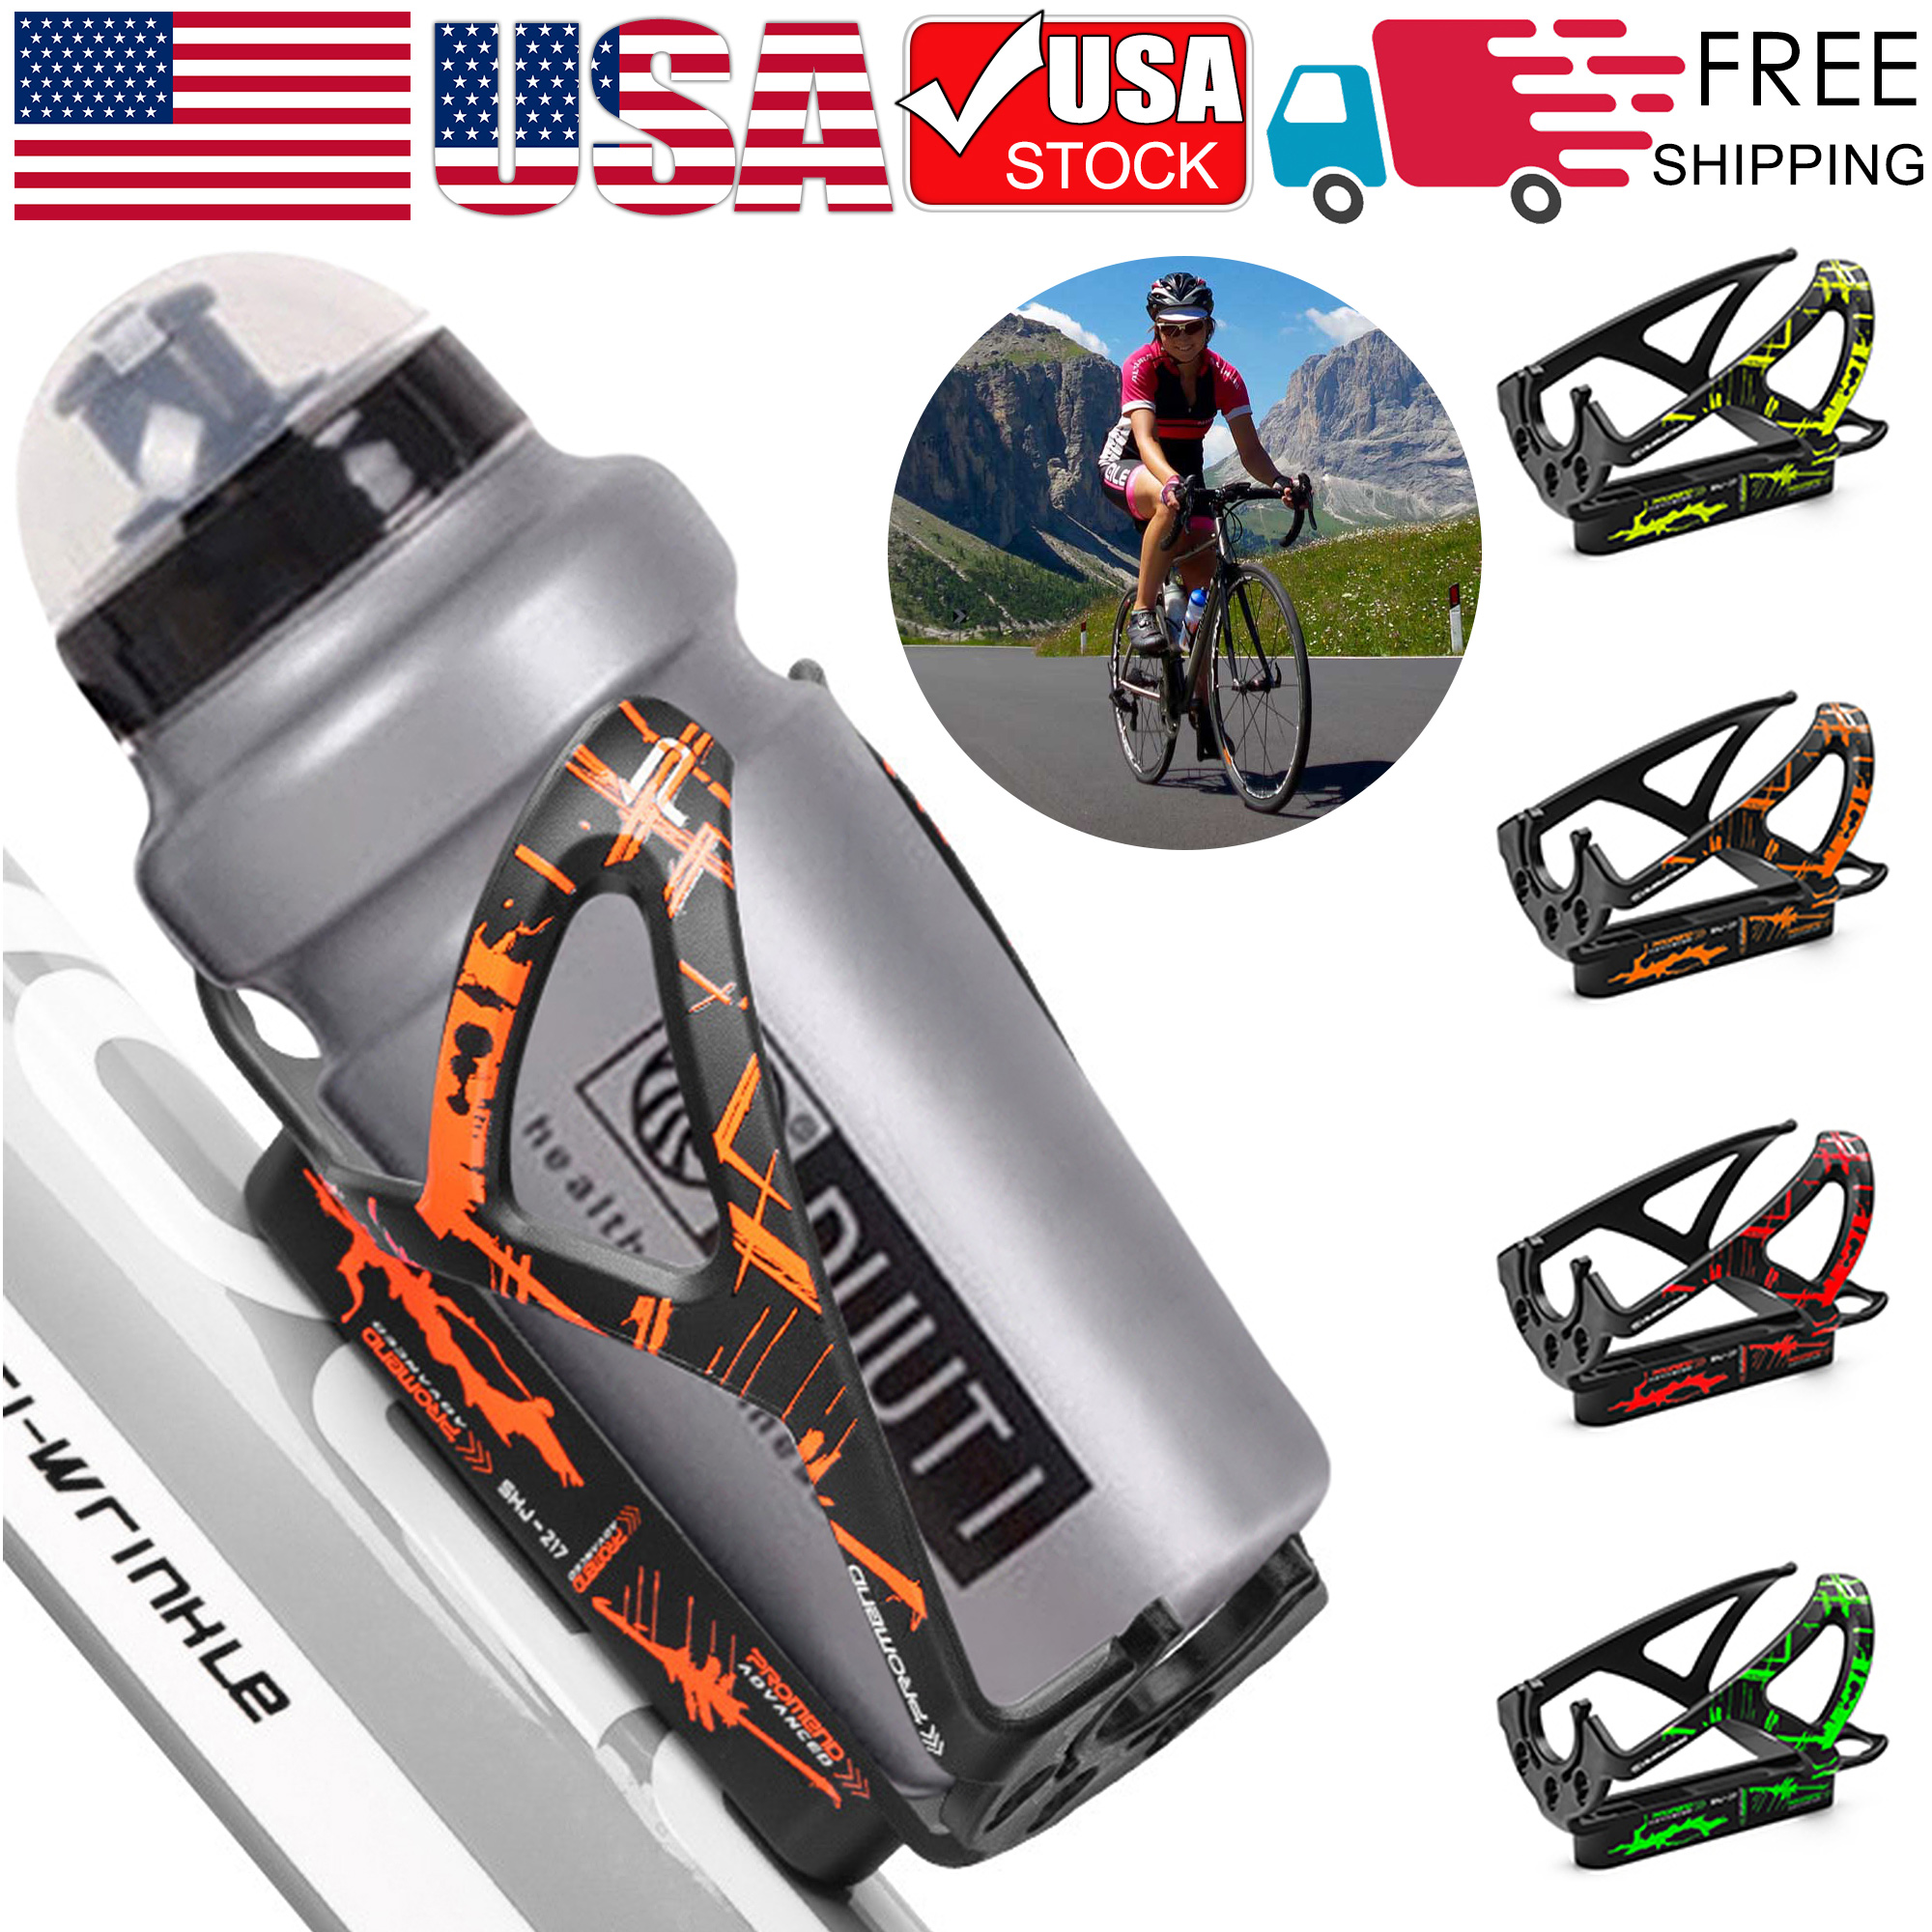 1 pc New Bicycle Bottle Cage Drink Water Bottle Rack Holder Mount for Bike New BrandNew Brand